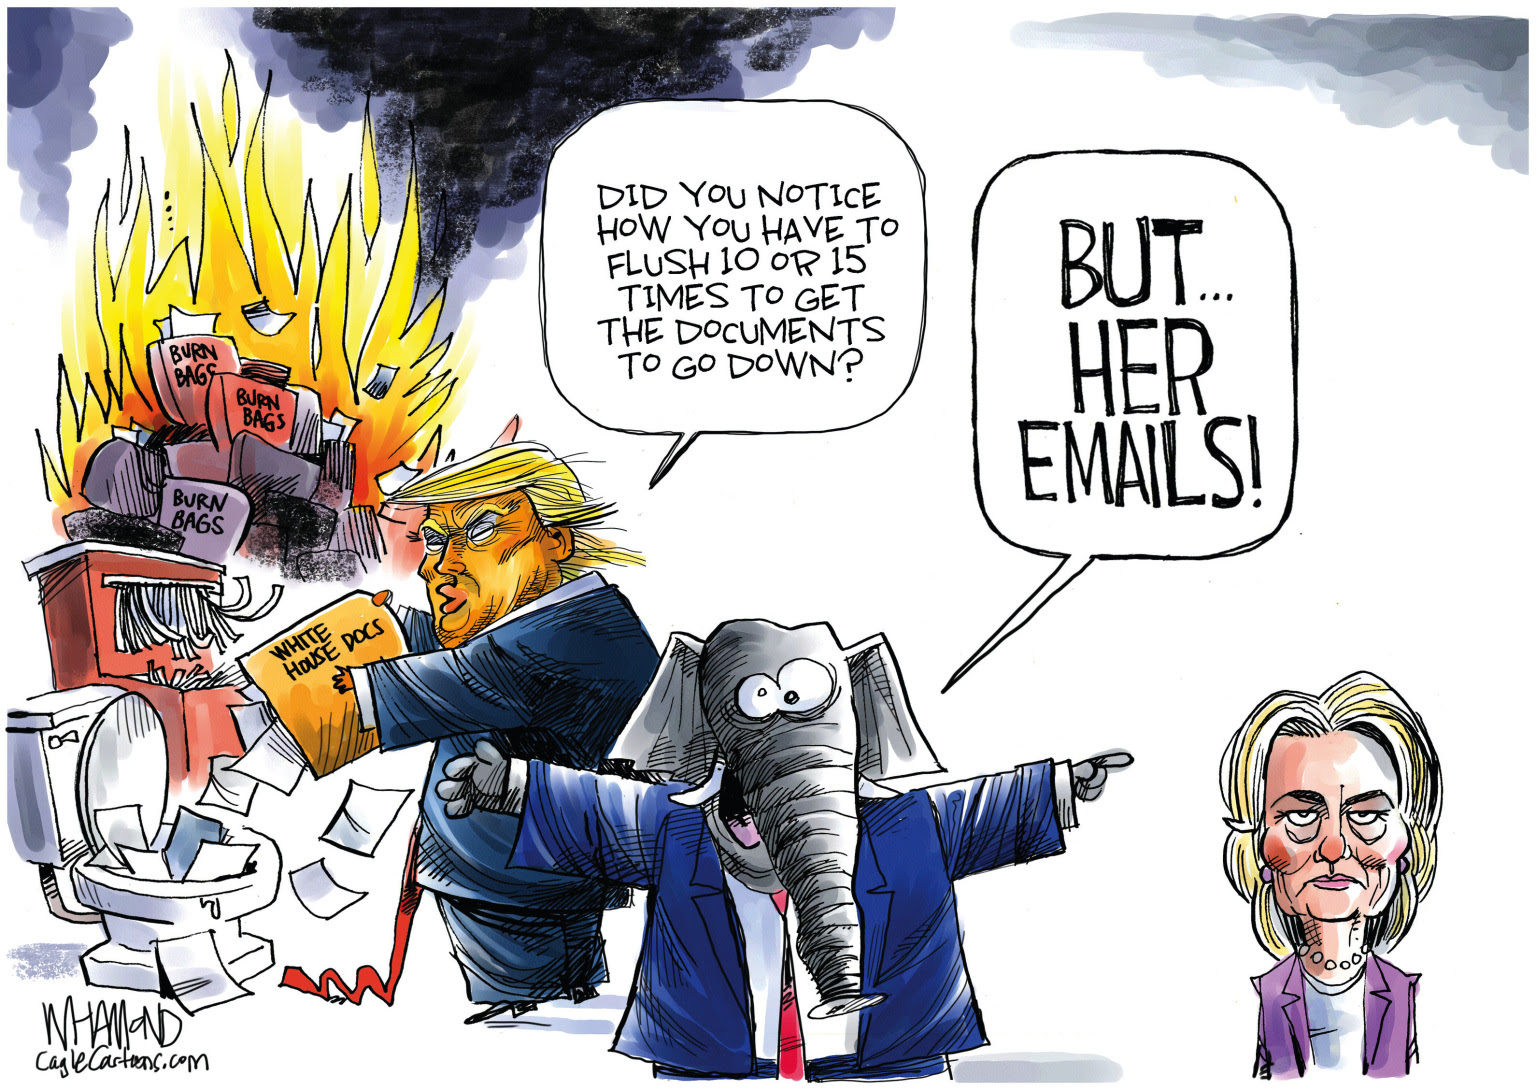 Republicans complain about Hillary email server while ignoring Trump destroying, eating and flushing documents.